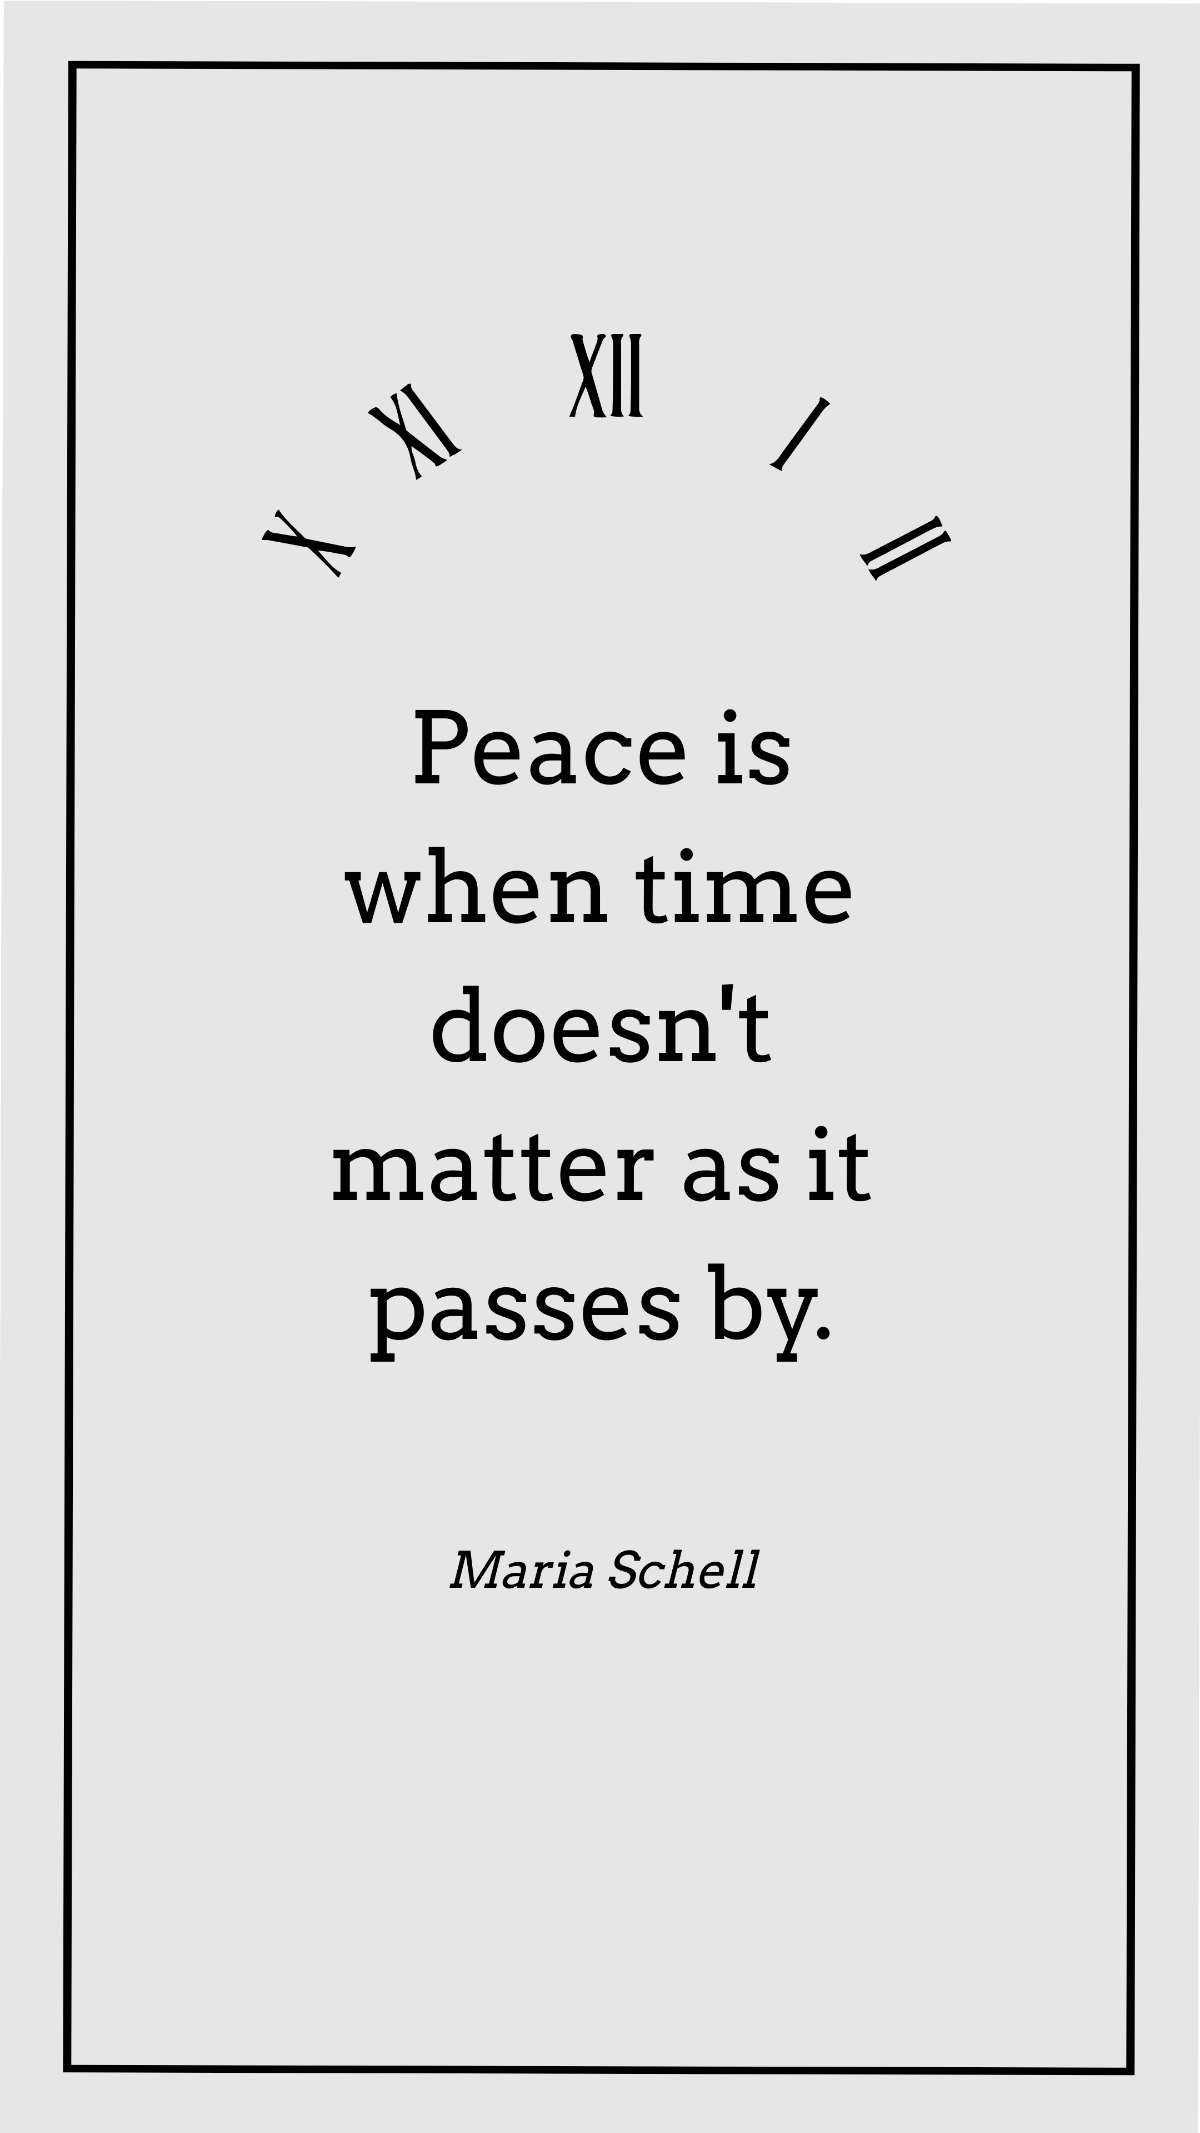 Free Maria Schell - Peace is when time doesn't matter as it passes by. Template